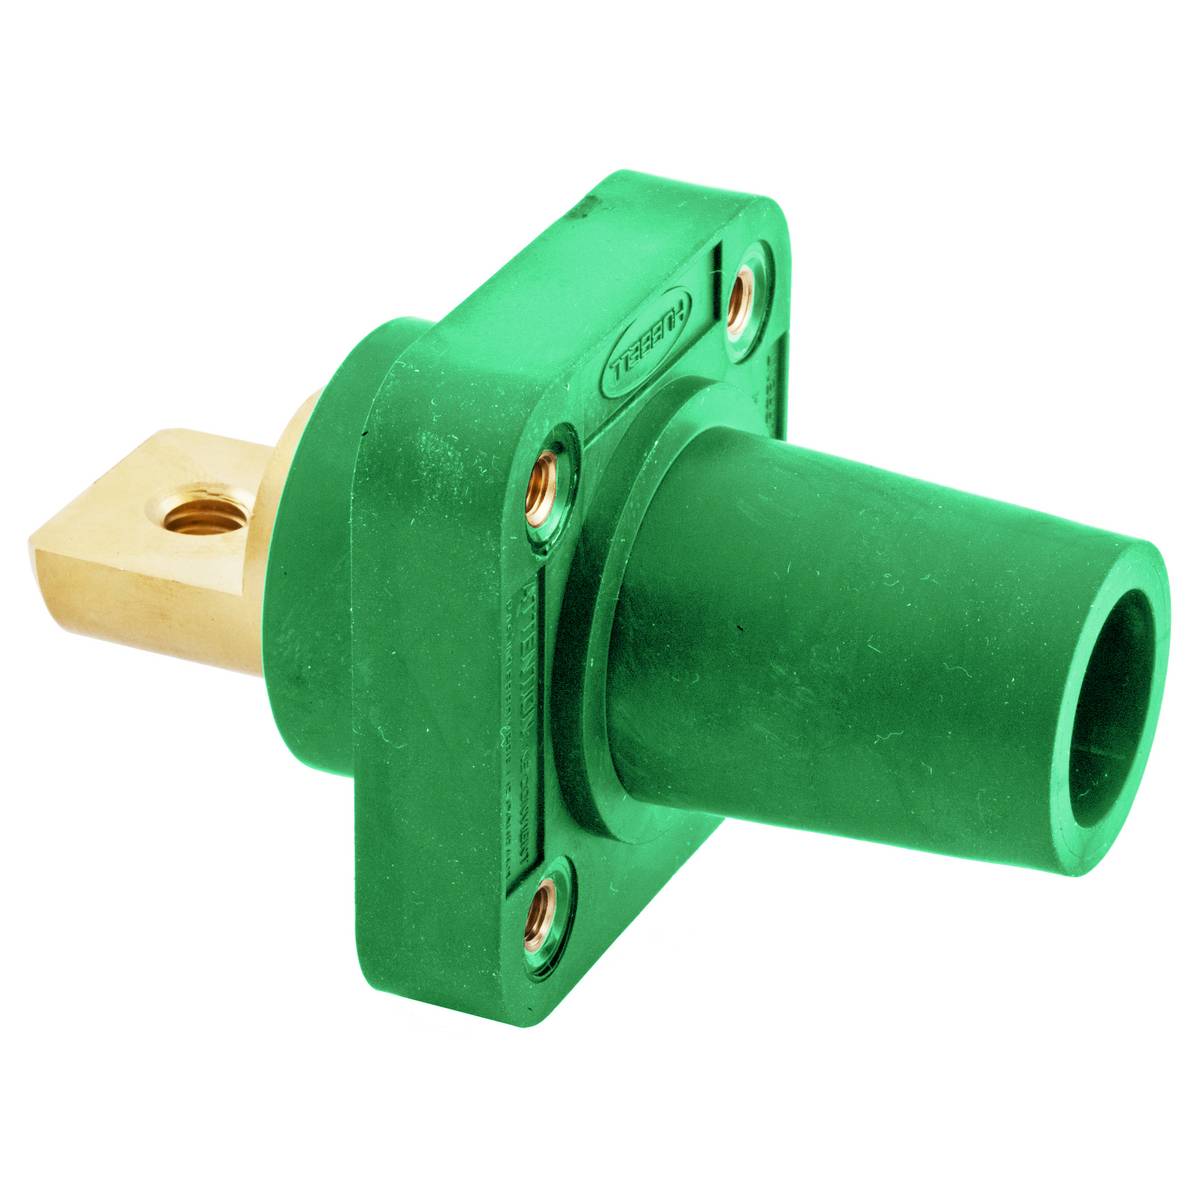 Bryant Electric Wiring Device-Kellems HBLFRBGN 16 Series 1-Flanged Cam Type Heavy Duty Industrial Grade Standard Single Pole Receptacle, 600 VAC/VDC, 250 VDC, 300/400 A, 4 to 4/0 AWG Wire, Busbar/Female Connection, NEMA 3R/4X/12 NEMA Rating